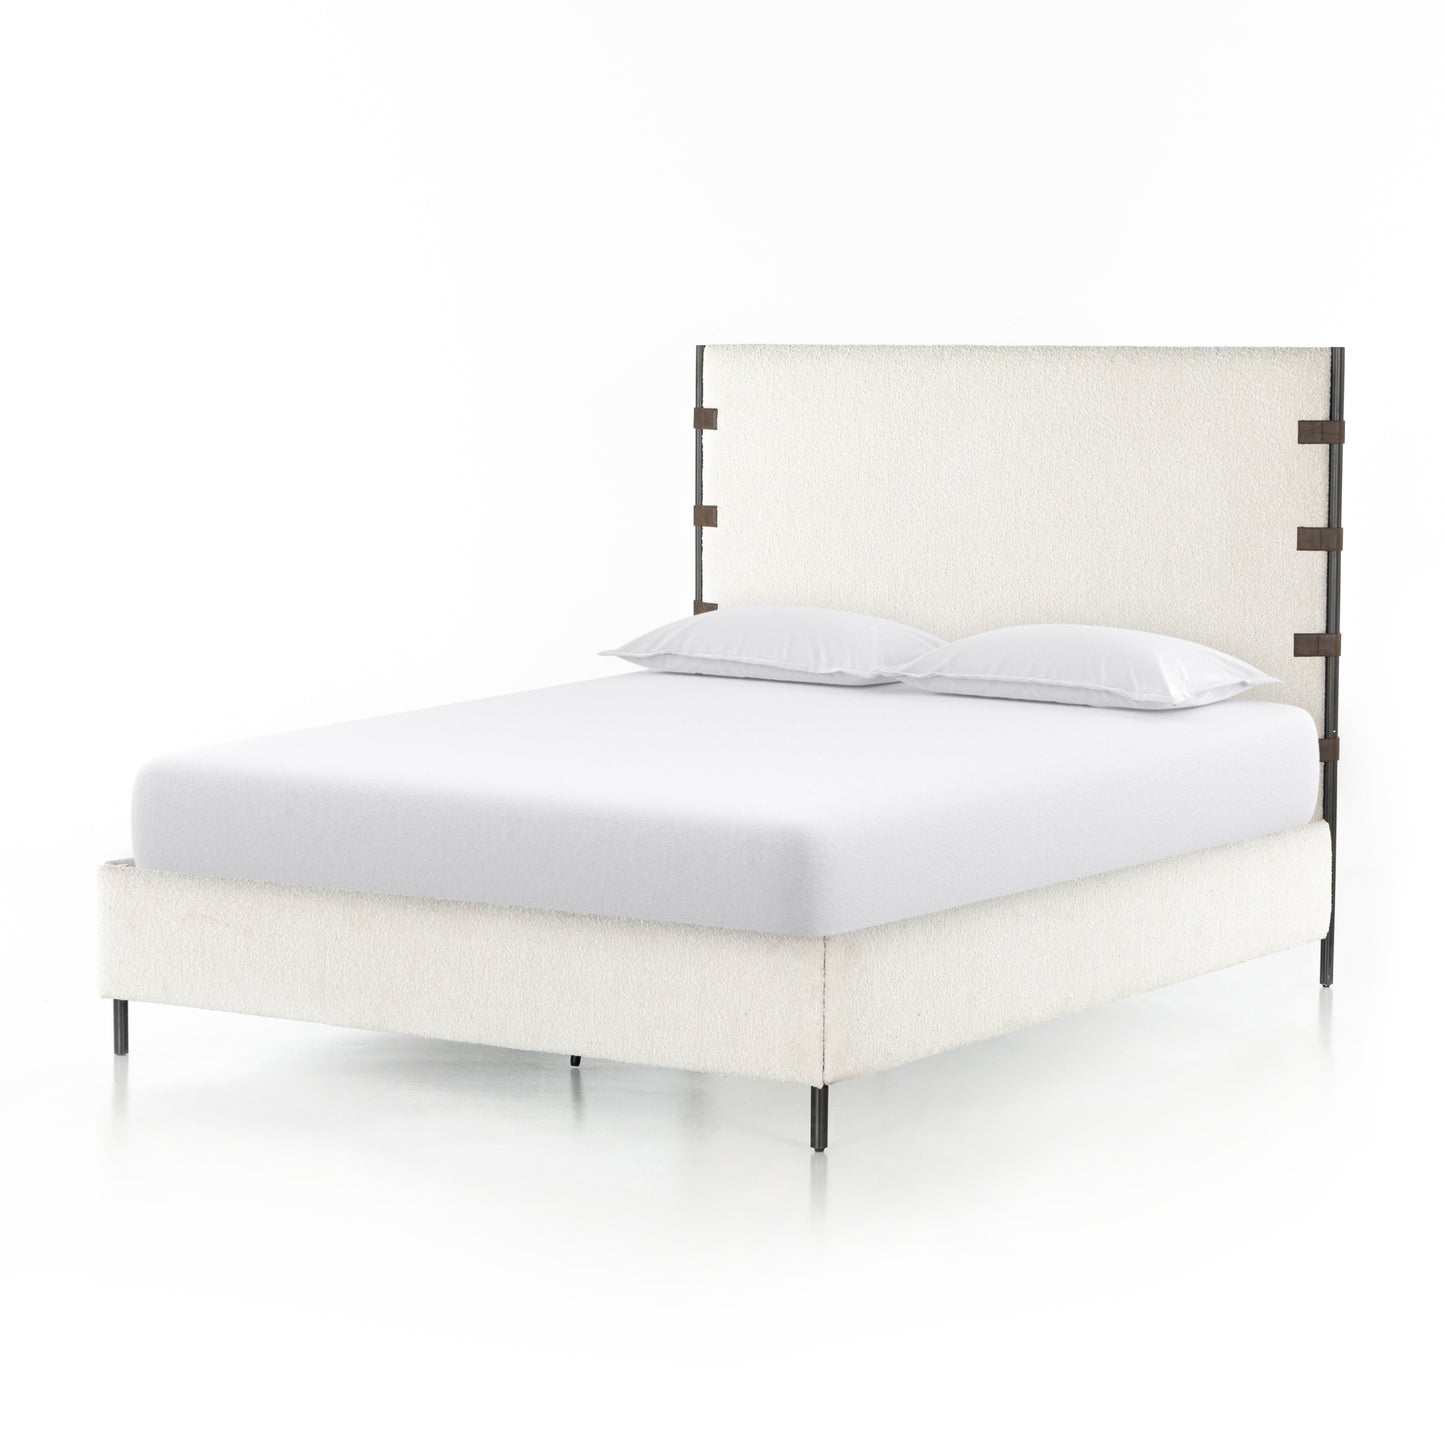 Load image into Gallery viewer, Anderson Bed KingBed Four Hands  King   Four Hands, Burke Decor, Mid Century Modern Furniture, Old Bones Furniture Company, Old Bones Co, Modern Mid Century, Designer Furniture, https://www.oldbonesco.com/
